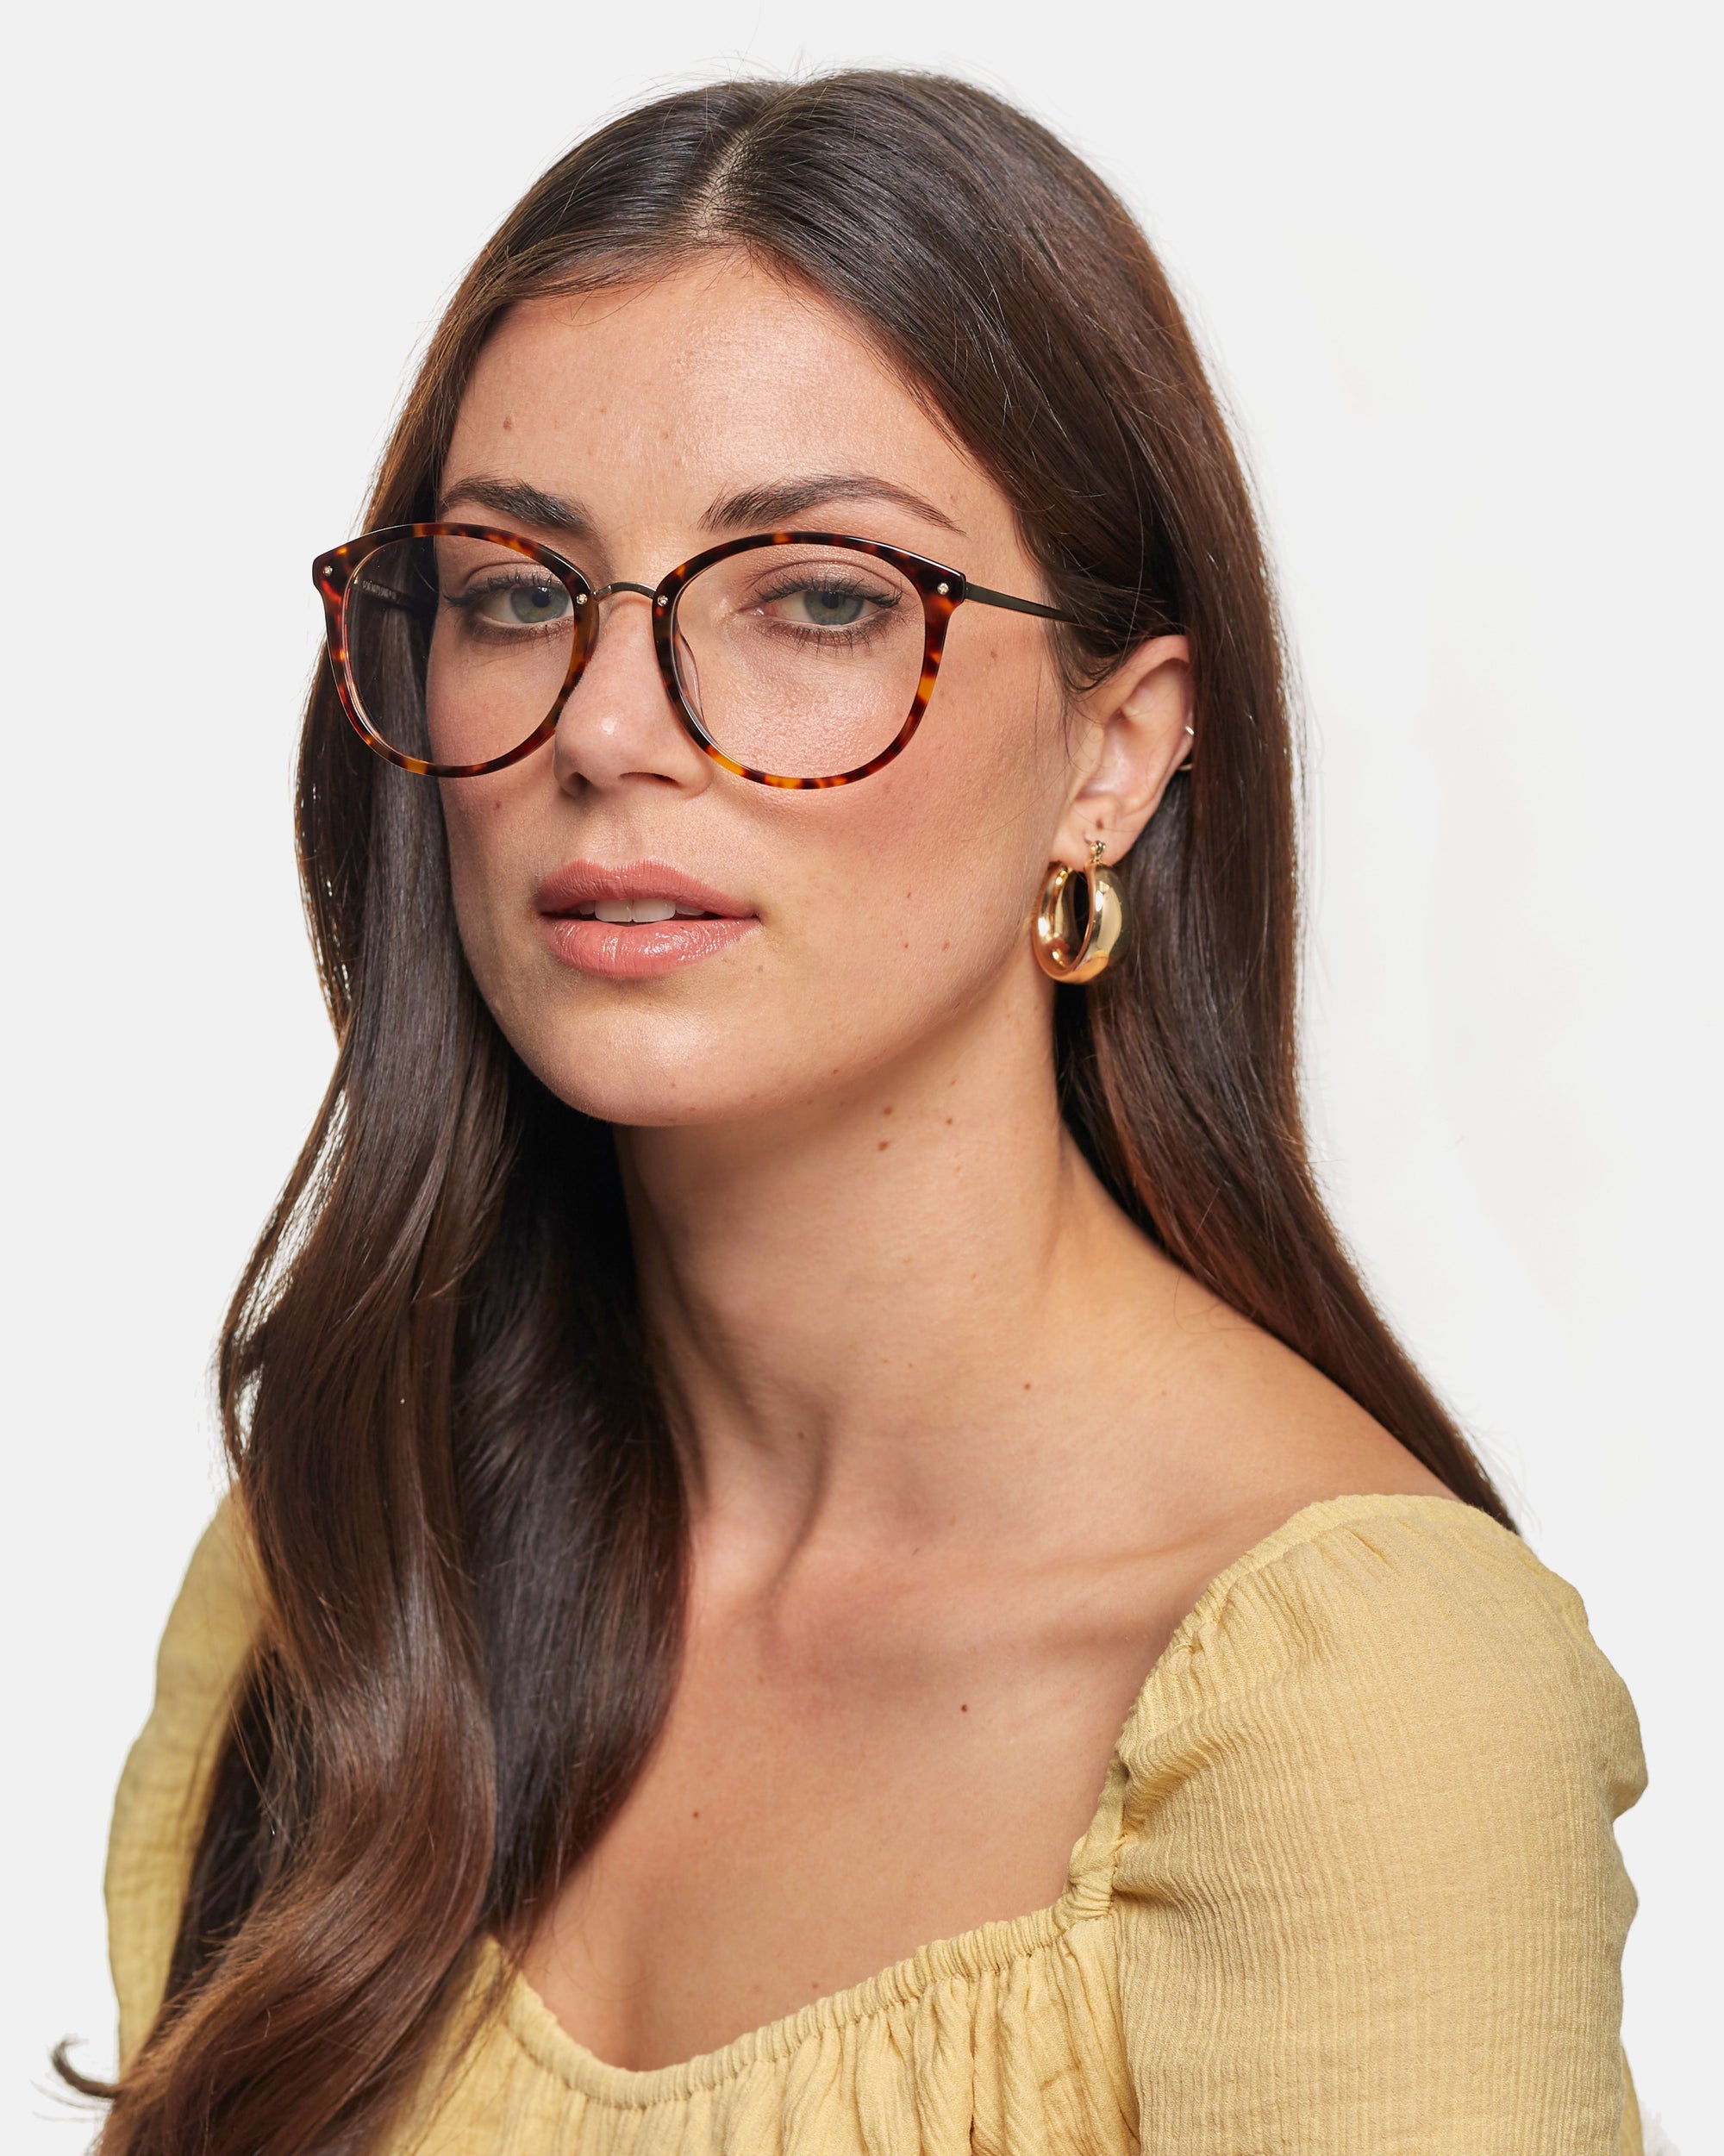 A person with long, brown hair wearing rectangular, tortoiseshell For Art&#39;s Sake® Club eyeglasses with a blue light filter and gold hoop earrings. They have on an off-the-shoulder, yellow blouse and are looking slightly to the side against a plain background.